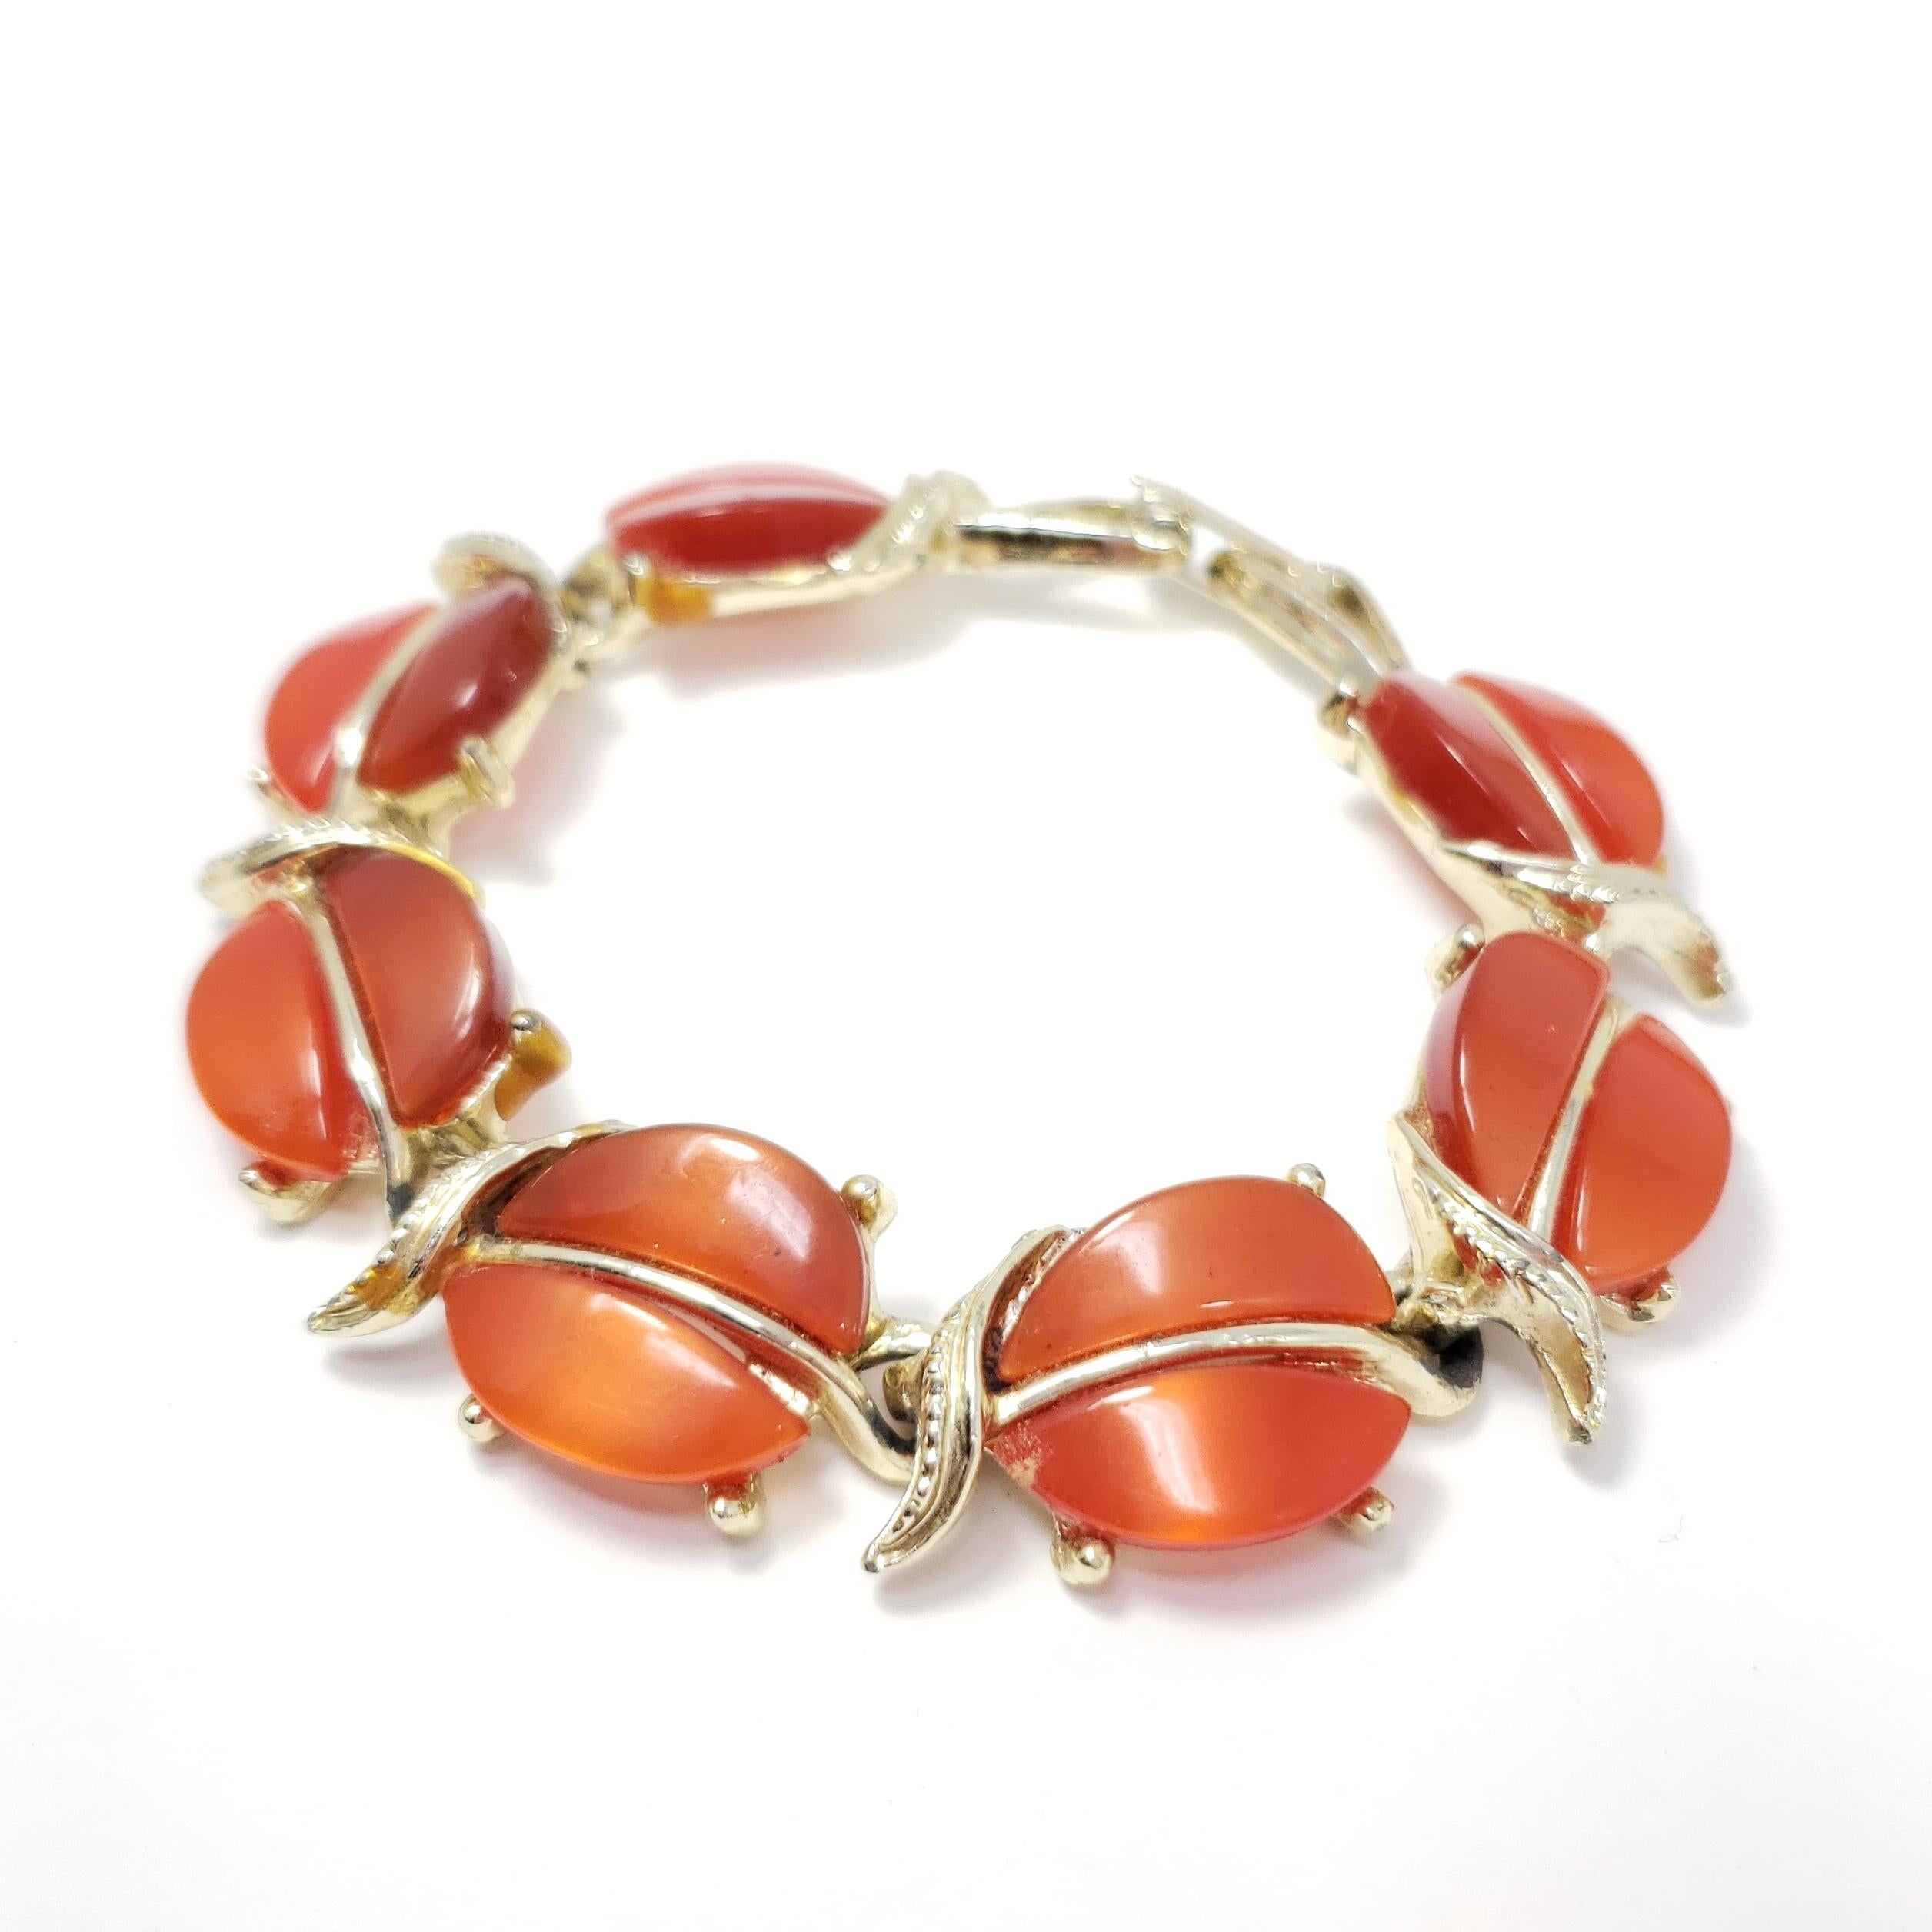 An extravagant retro bracelet featuring amber-colored leaf motifs, prong-set in golden links.

Gold-plated. Fold over clasp.